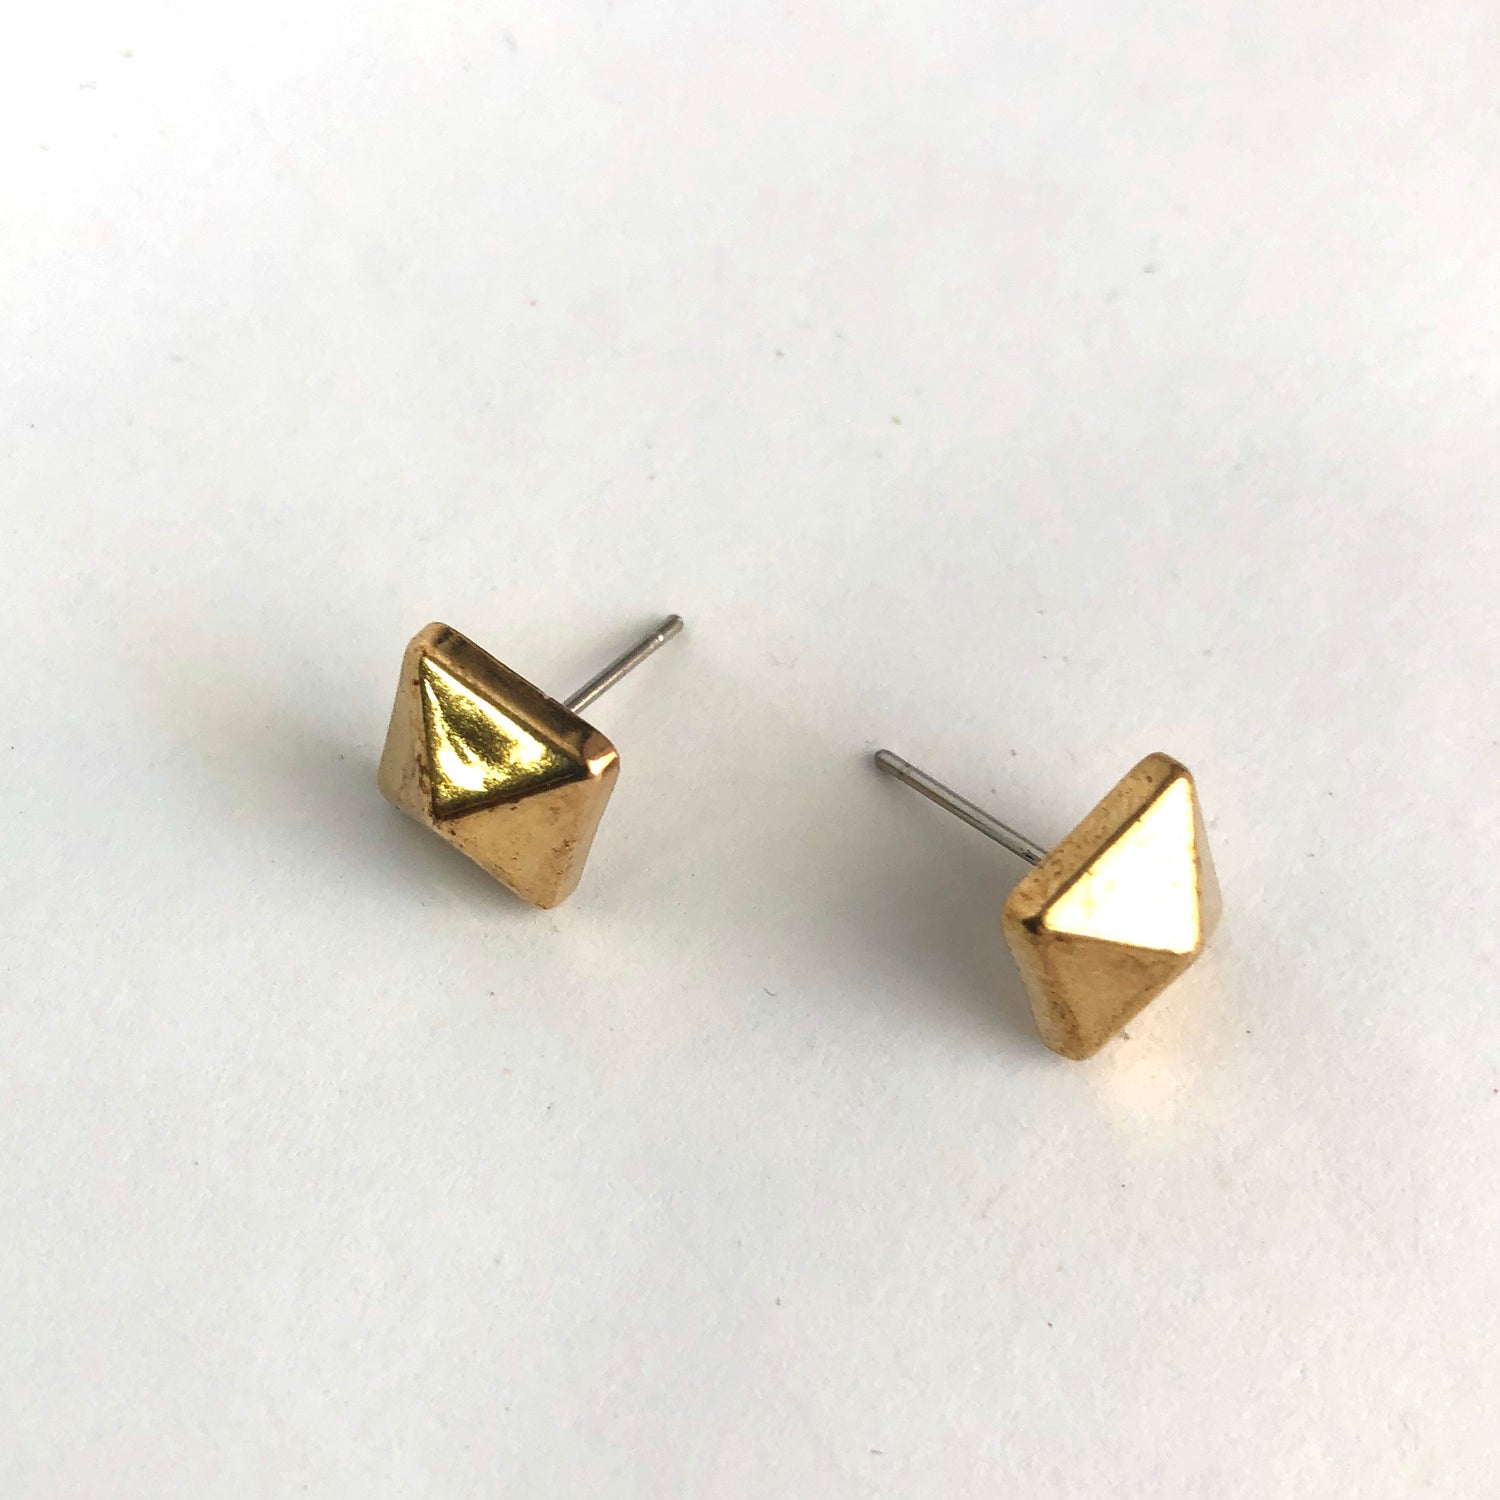 Bronze Square Faceted Acrylic Spike Stud Earrings